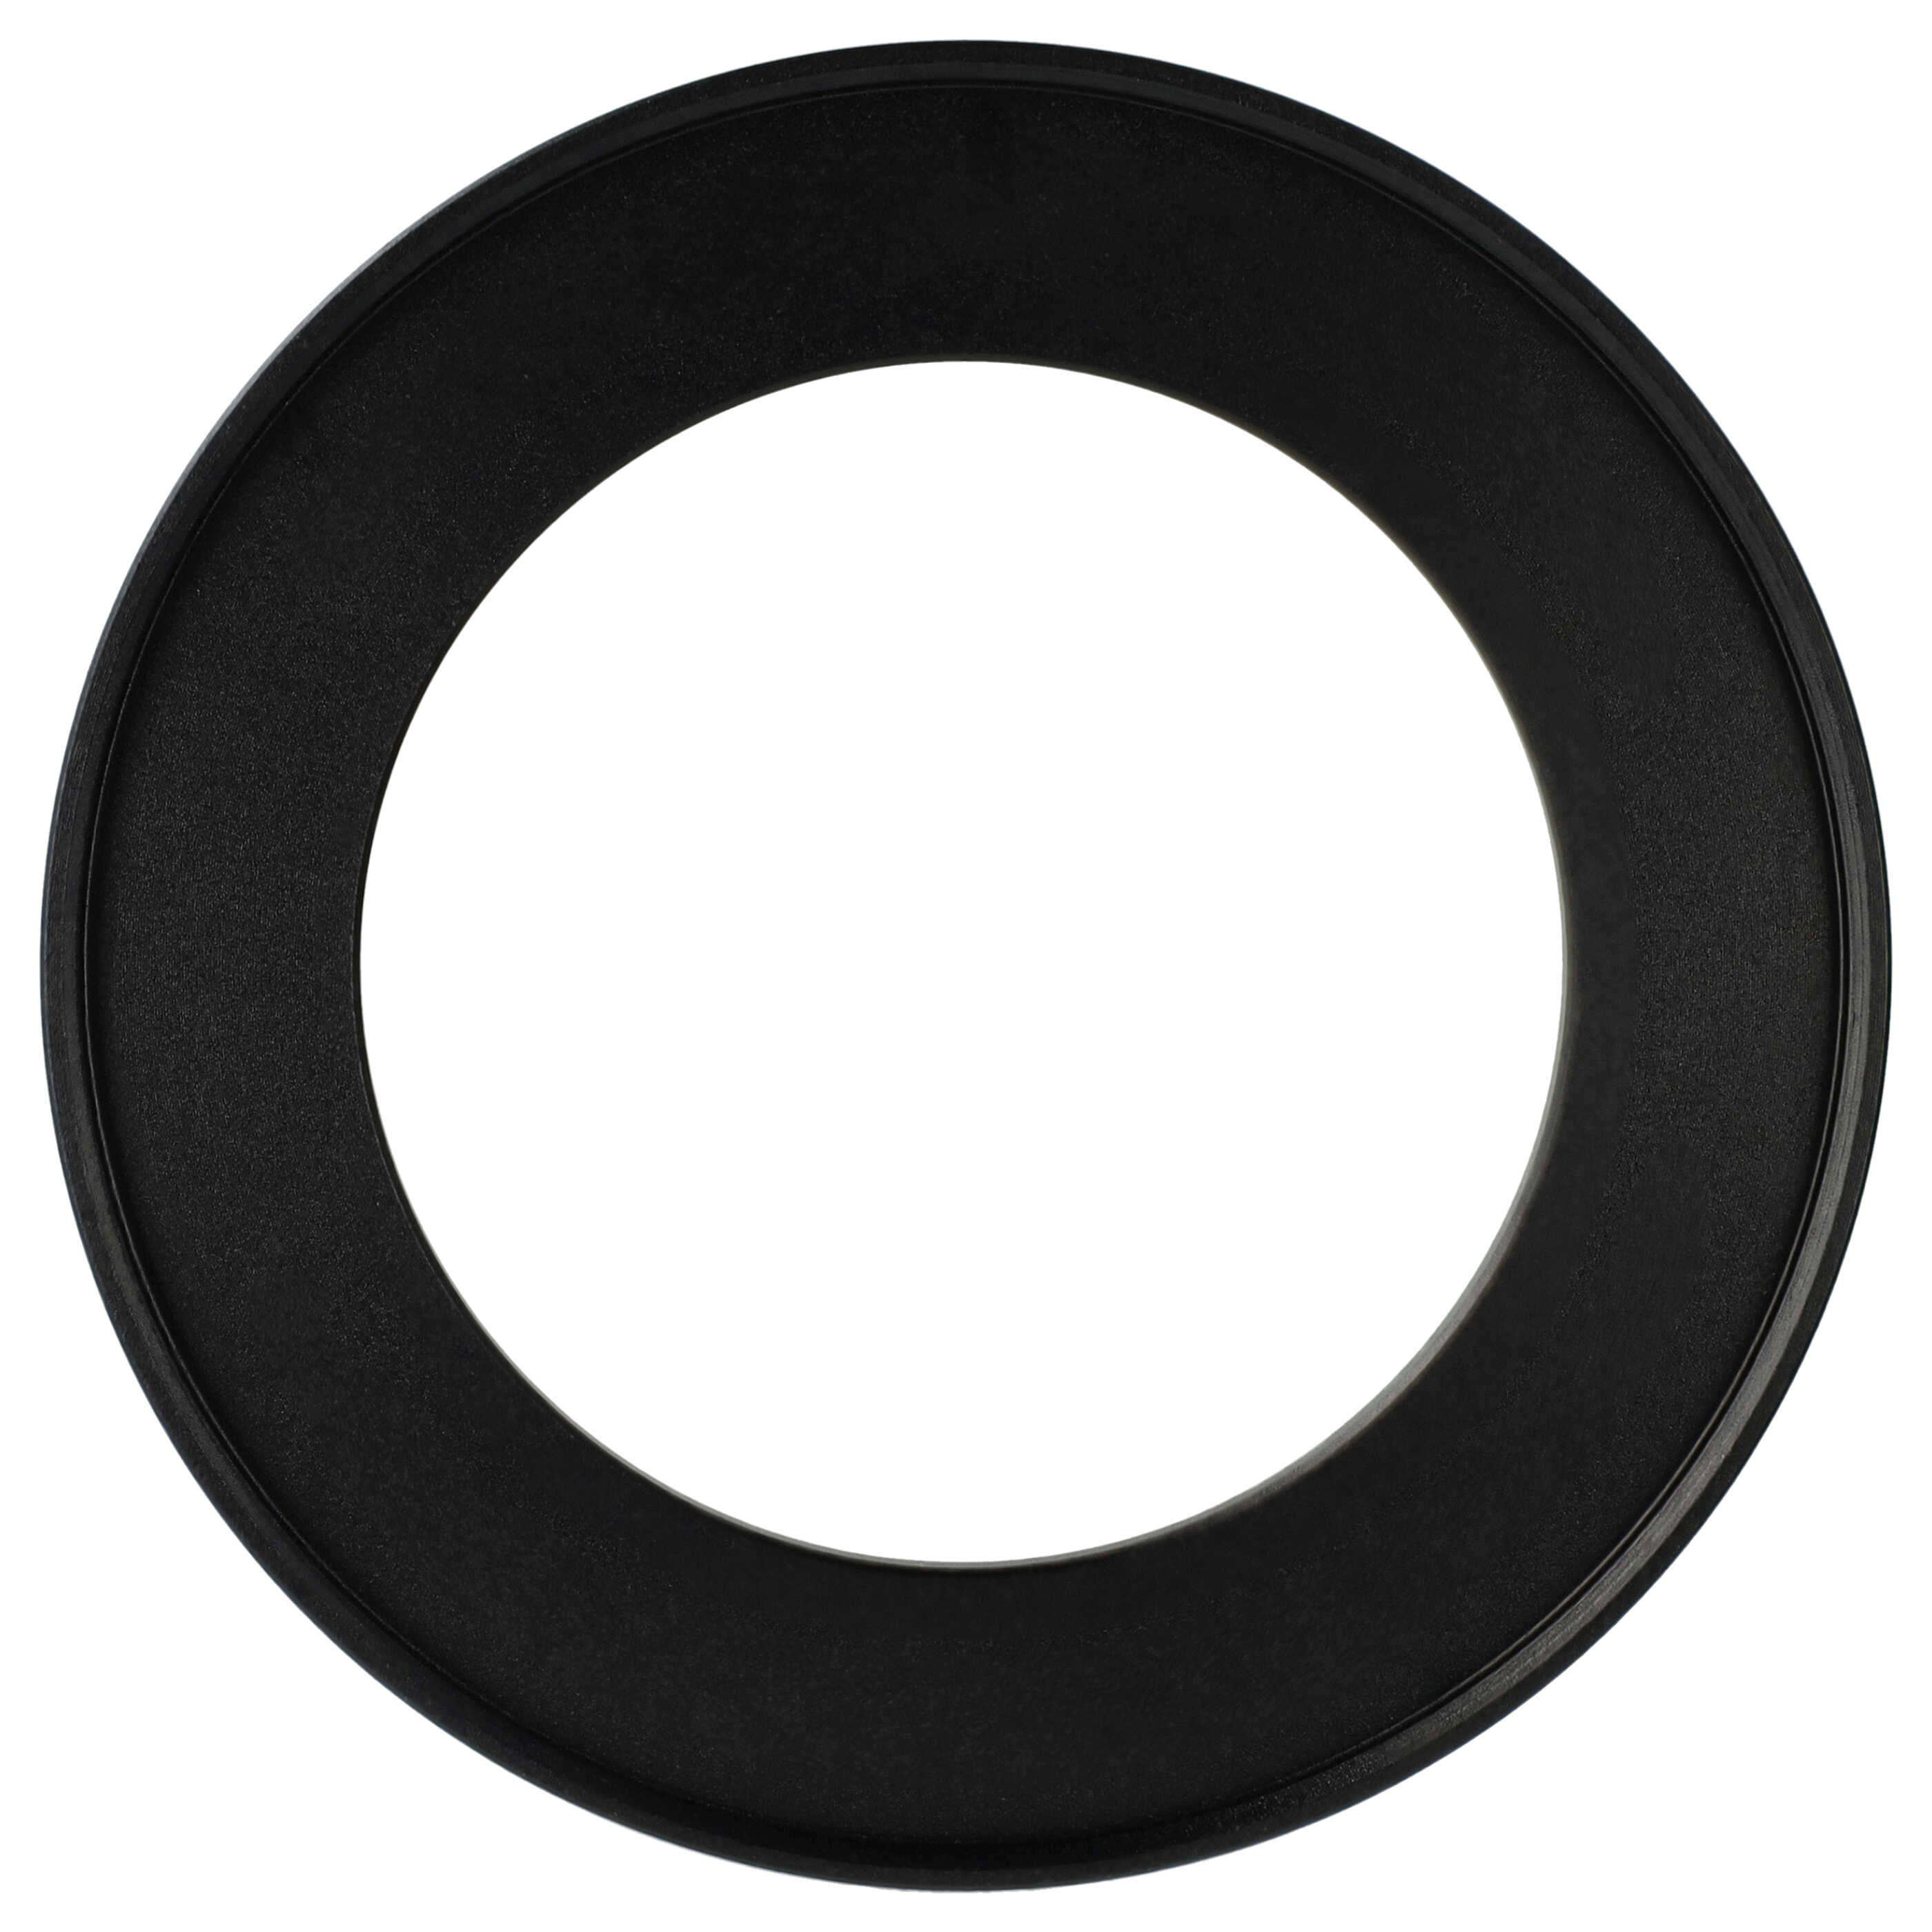 Step-Up Ring Adapter of 55 mm to 77 mmfor various Camera Lens - Filter Adapter